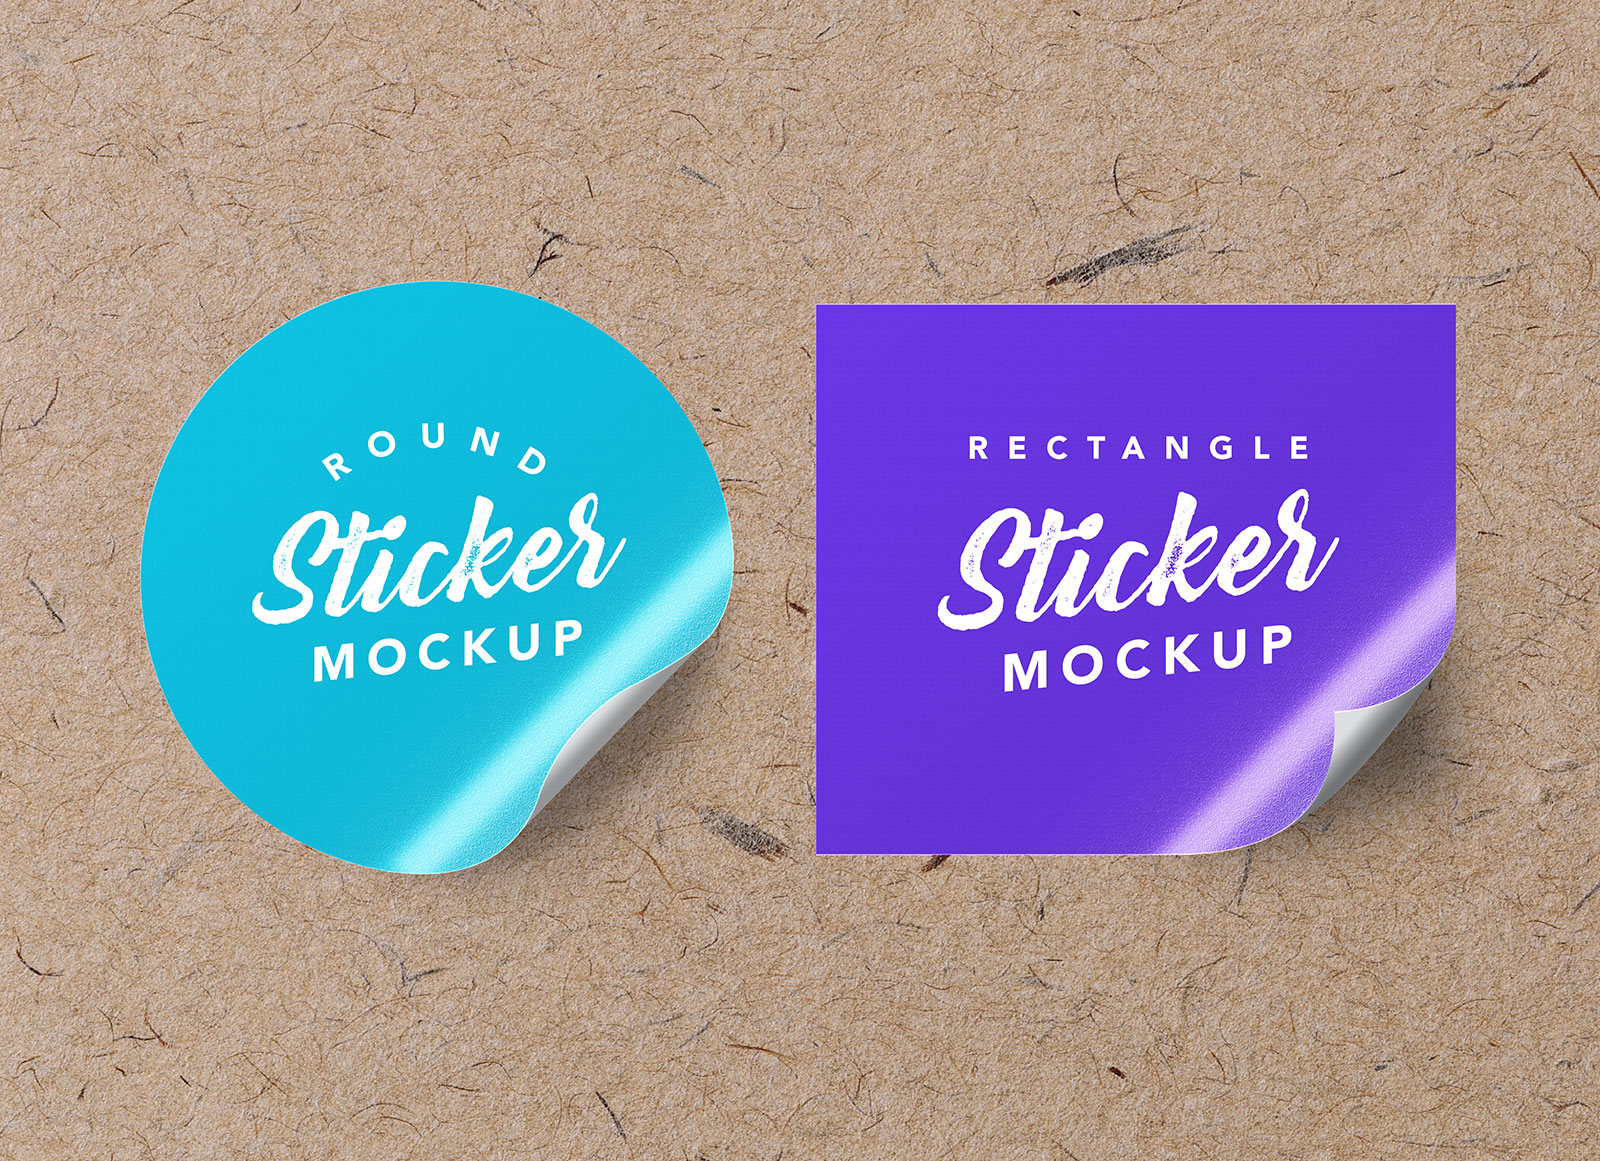 Download Free Textured Round & Rectangle Sticker Mockup PSD - Good Mockups